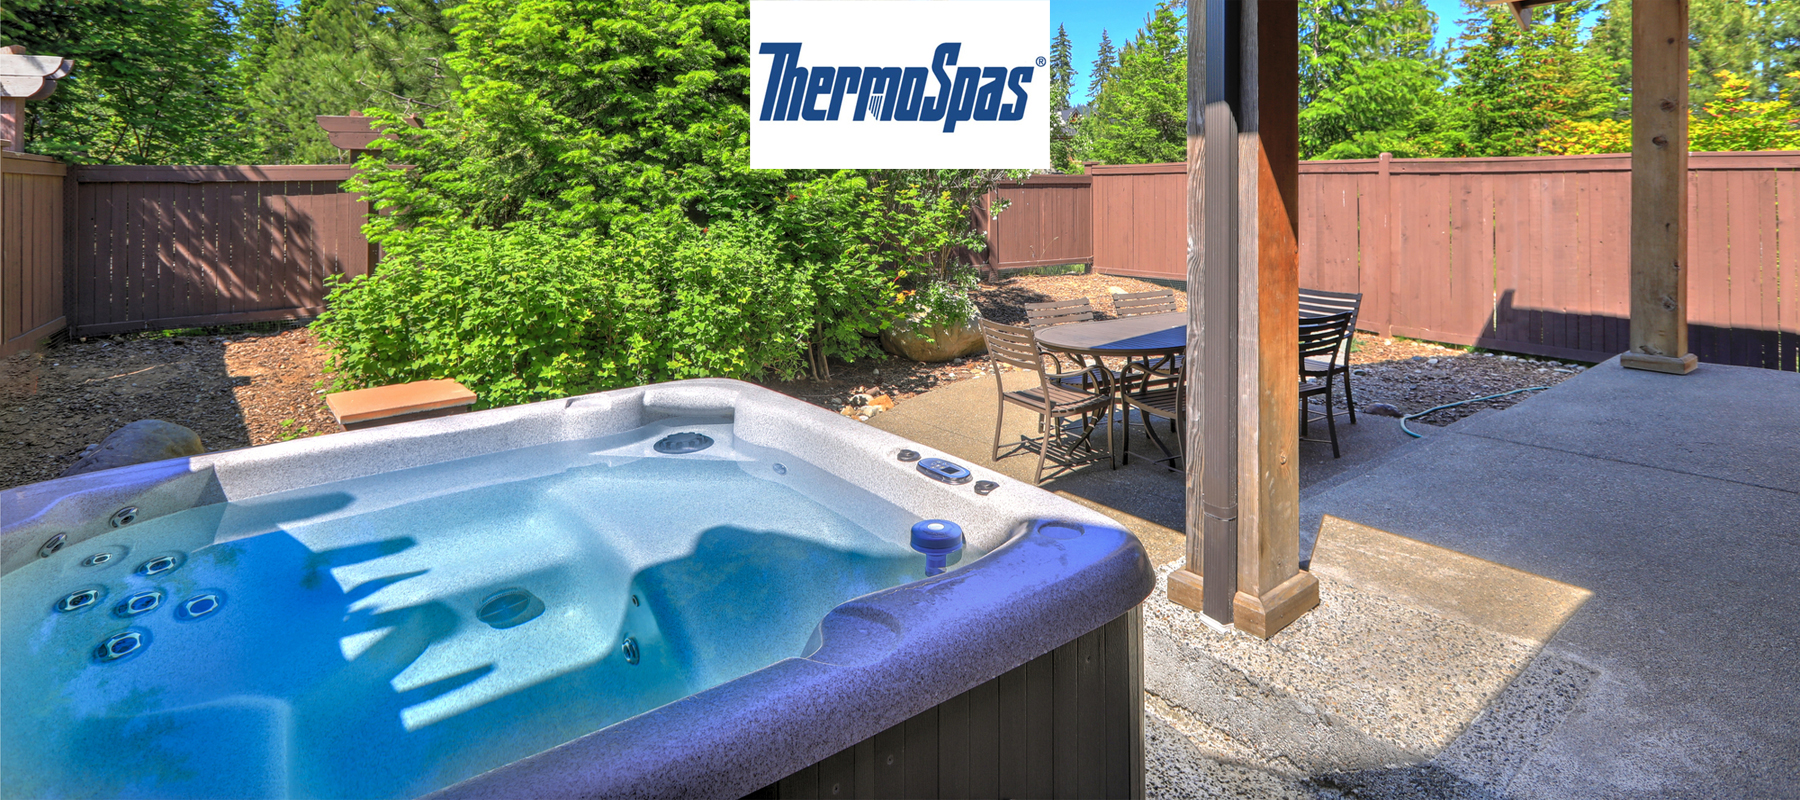 How Much Does a Thermospa Hot Tub Cost?